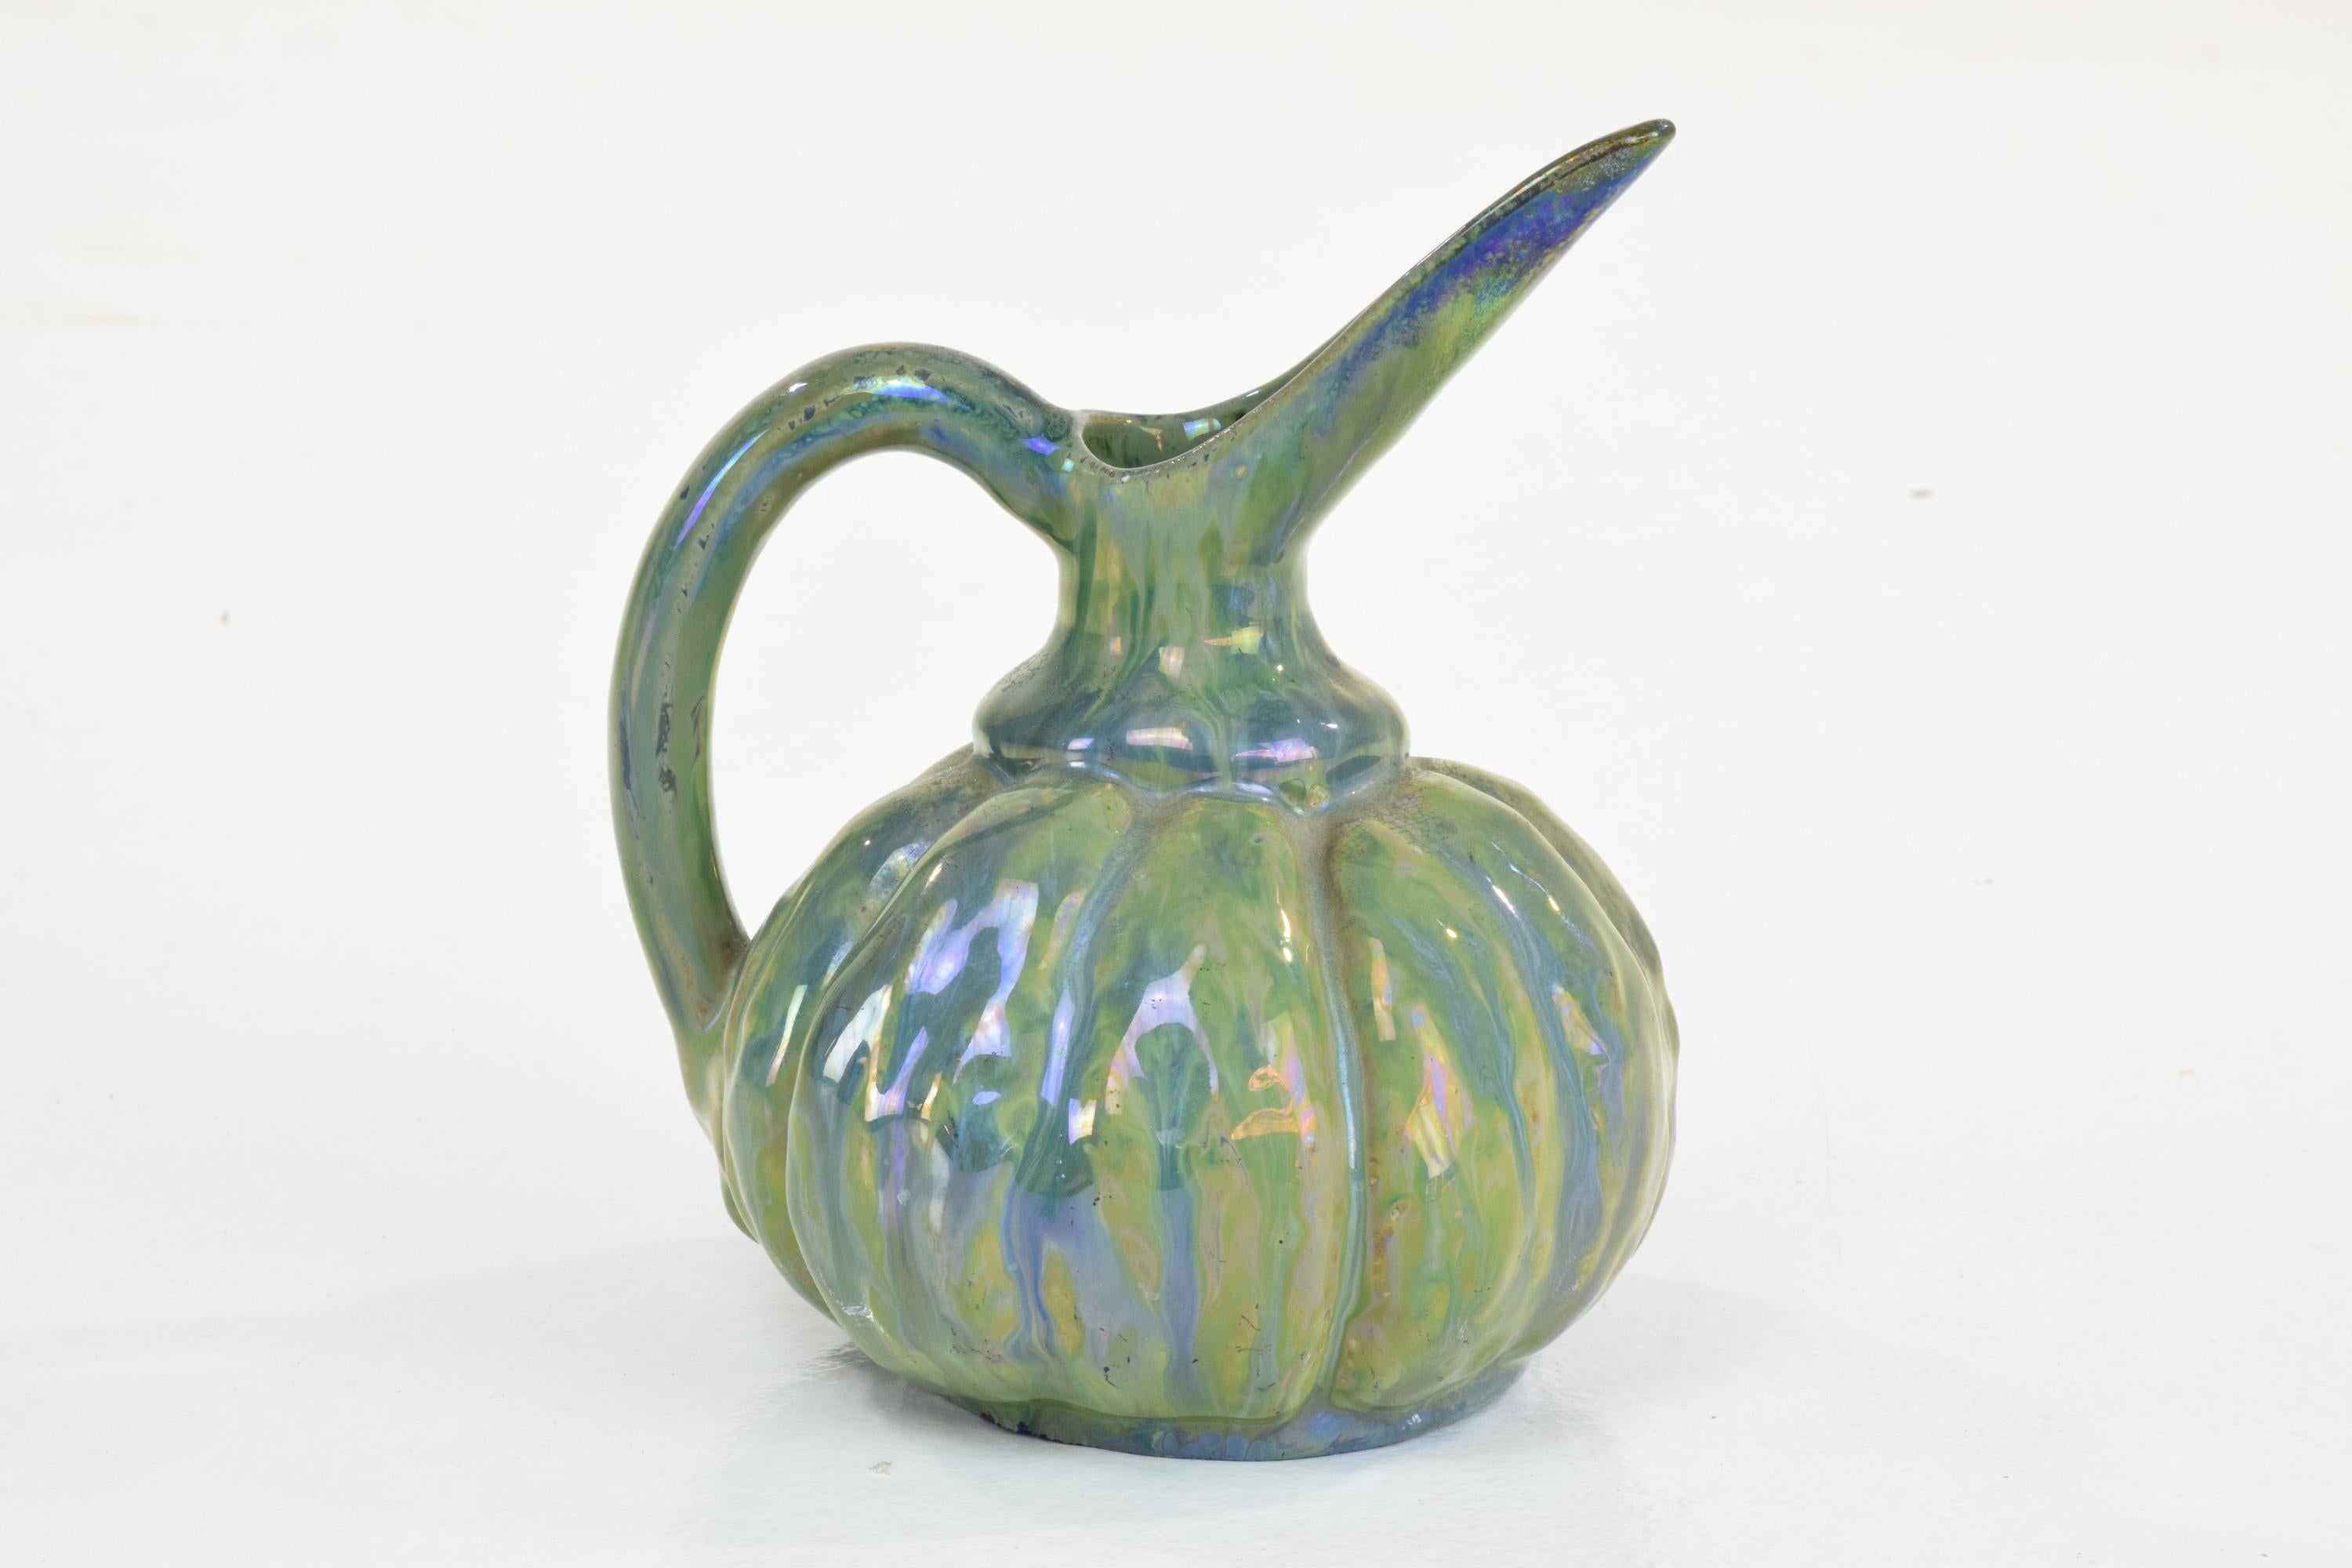 20th Century French Vintage Iridescent Art Nouveau Ceramic Jug by Alphonse Cytere, 1910 For Sale